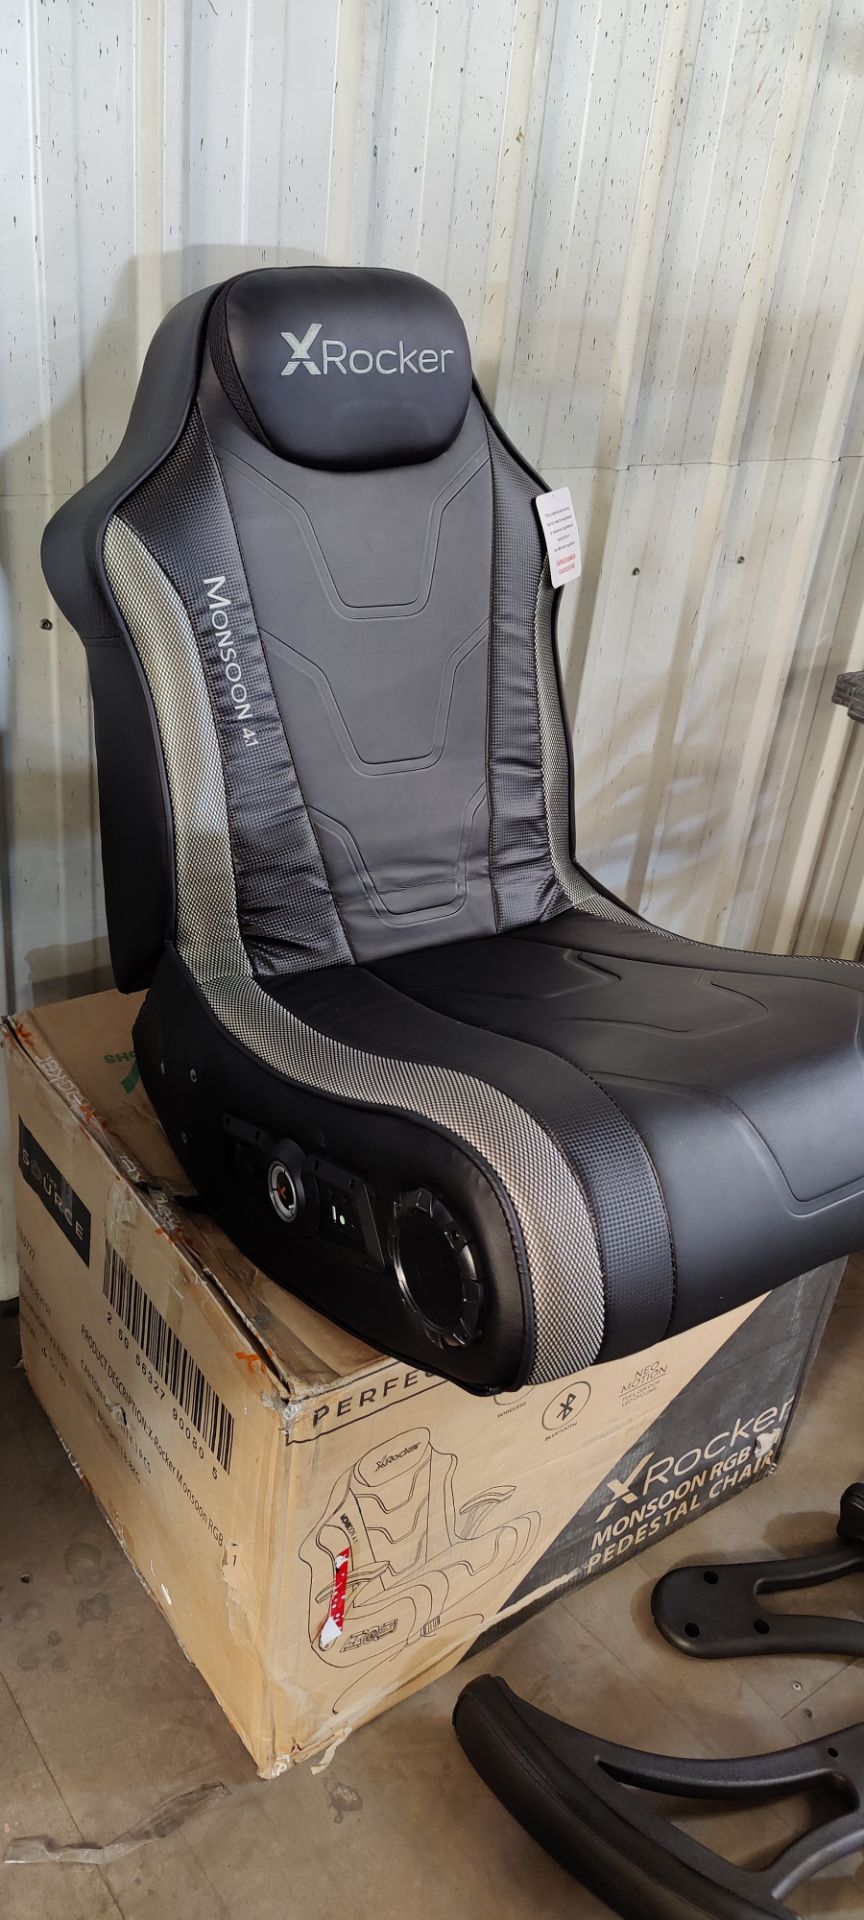 (P3) X-Rocker Evo Pro 4.1 Multimedia LED Gaming Chair RRP £299. Unit Missing Cables, Box Damaged. - Image 3 of 3